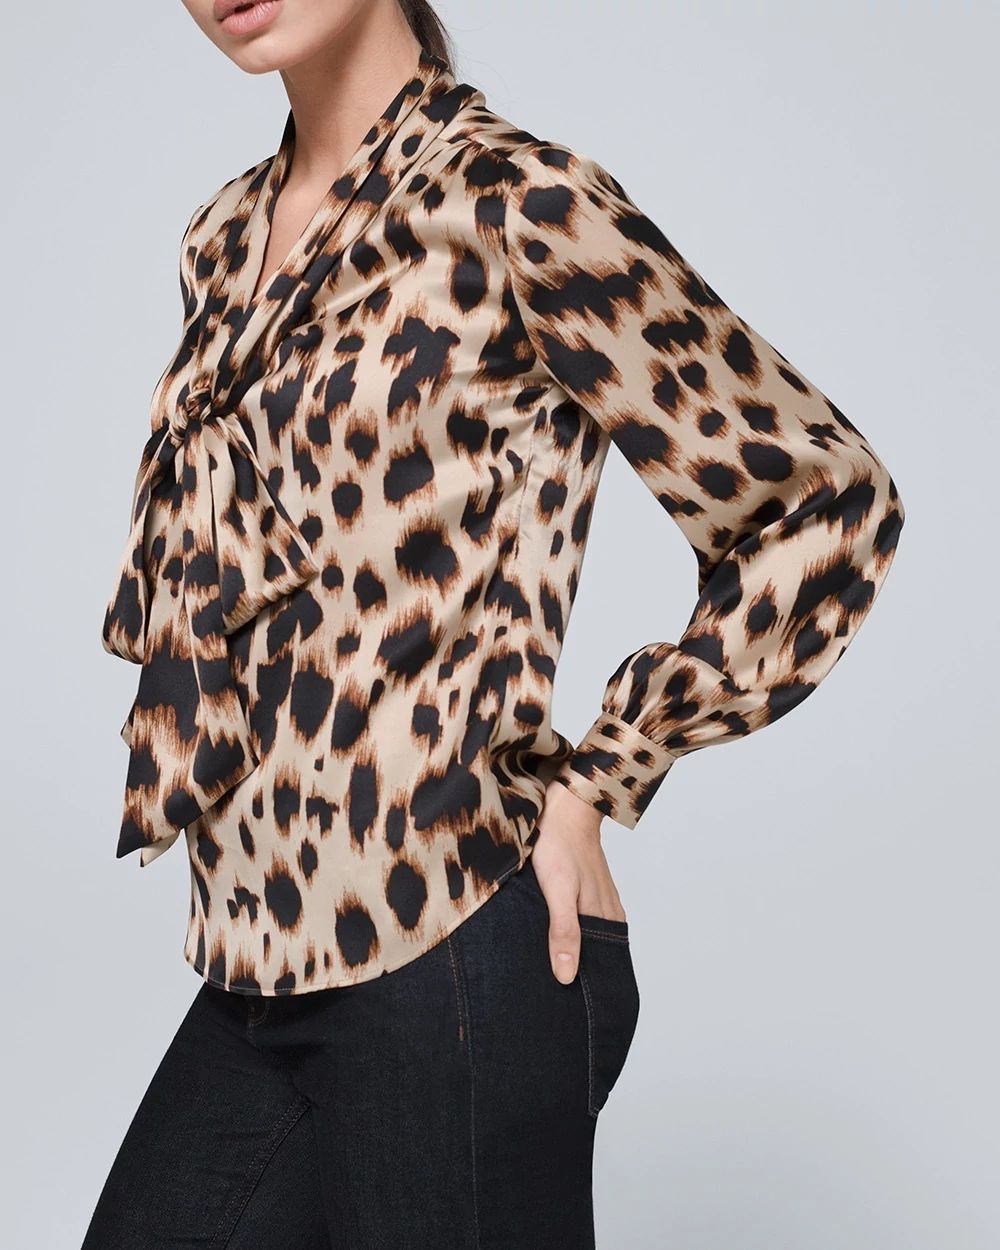 Leopard-Print Bow Blouse click to view larger image.